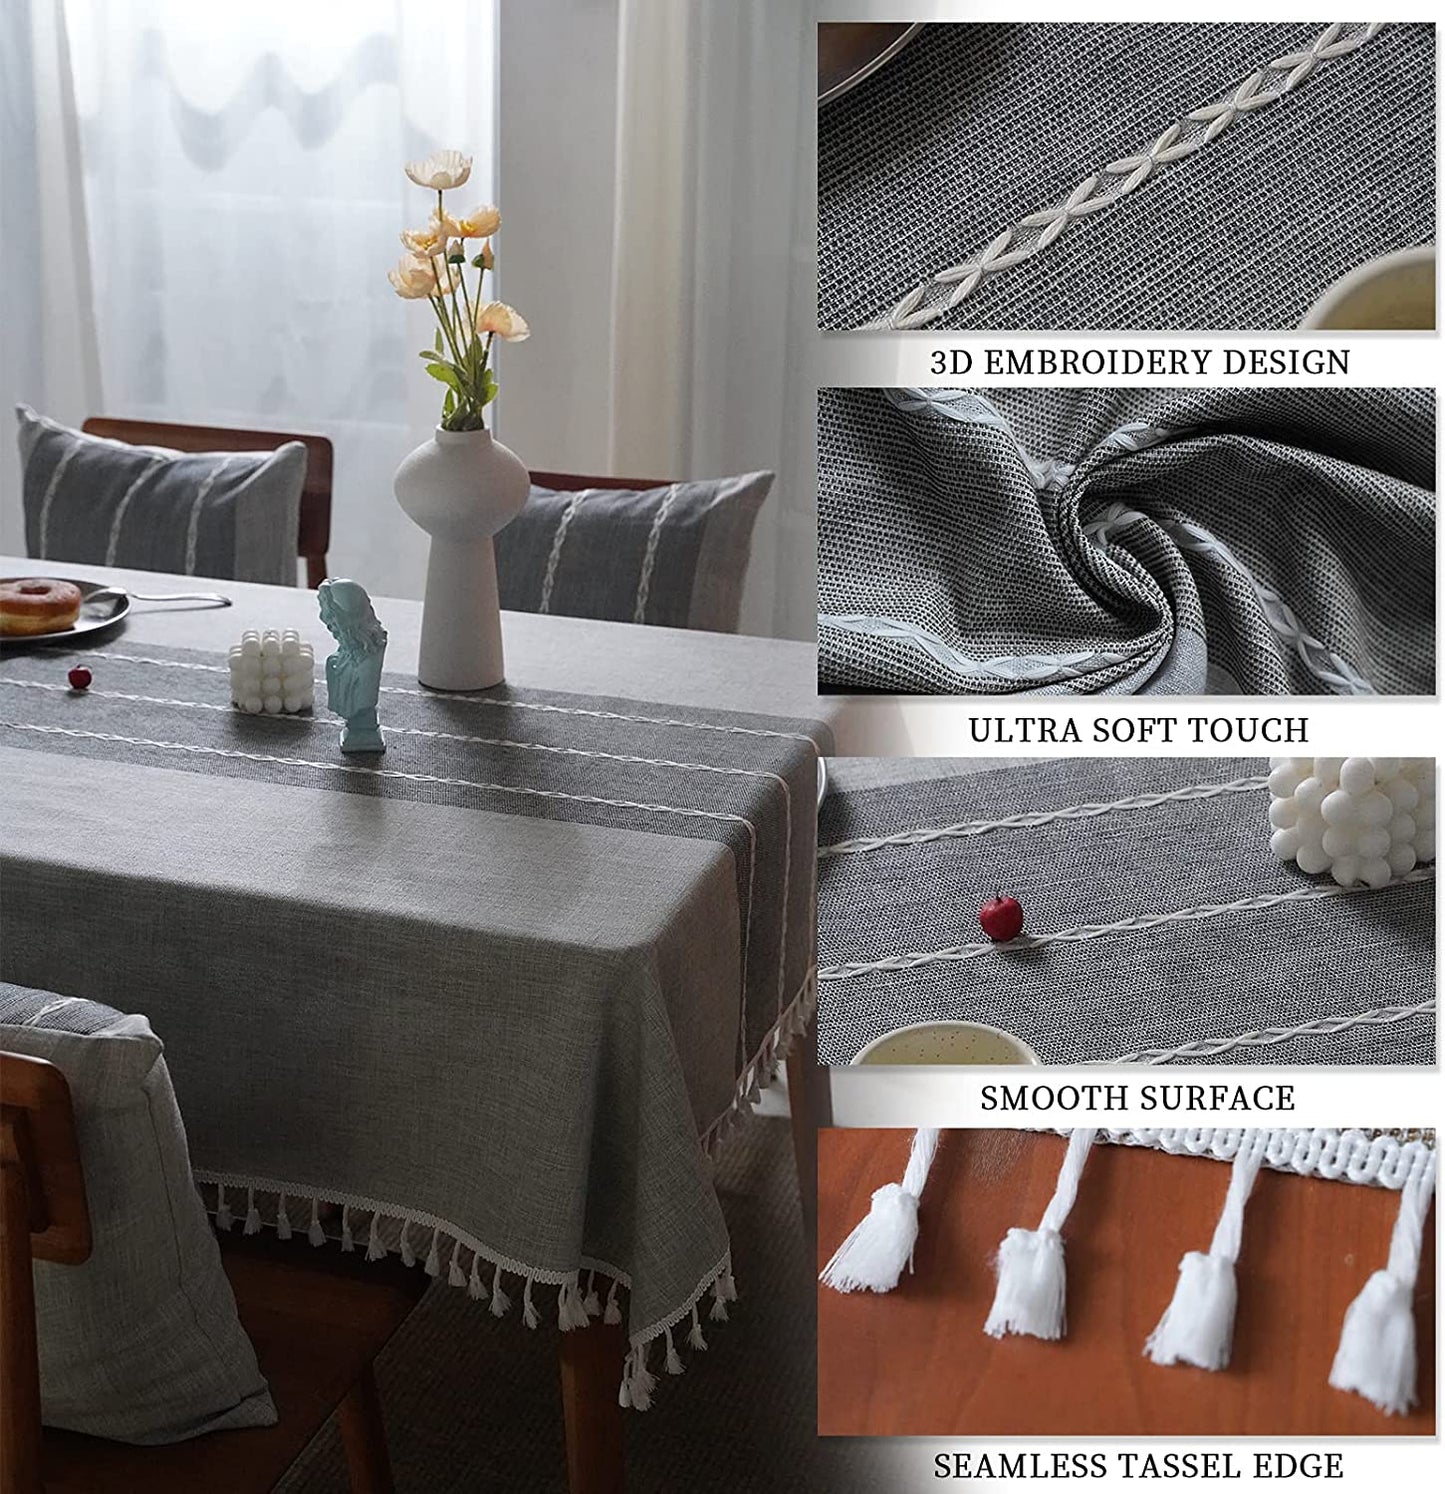 Mokani Middle Embroidery Table Cloth Washable Cotton Linen Tassel Tablecloth, Rectangle Wrinkle Free Anti-Fading Table Cover for Kitchen Dinning Thanksgiving Christmas (55 x 120 Inch, Gray) - (For 6 piece(s))